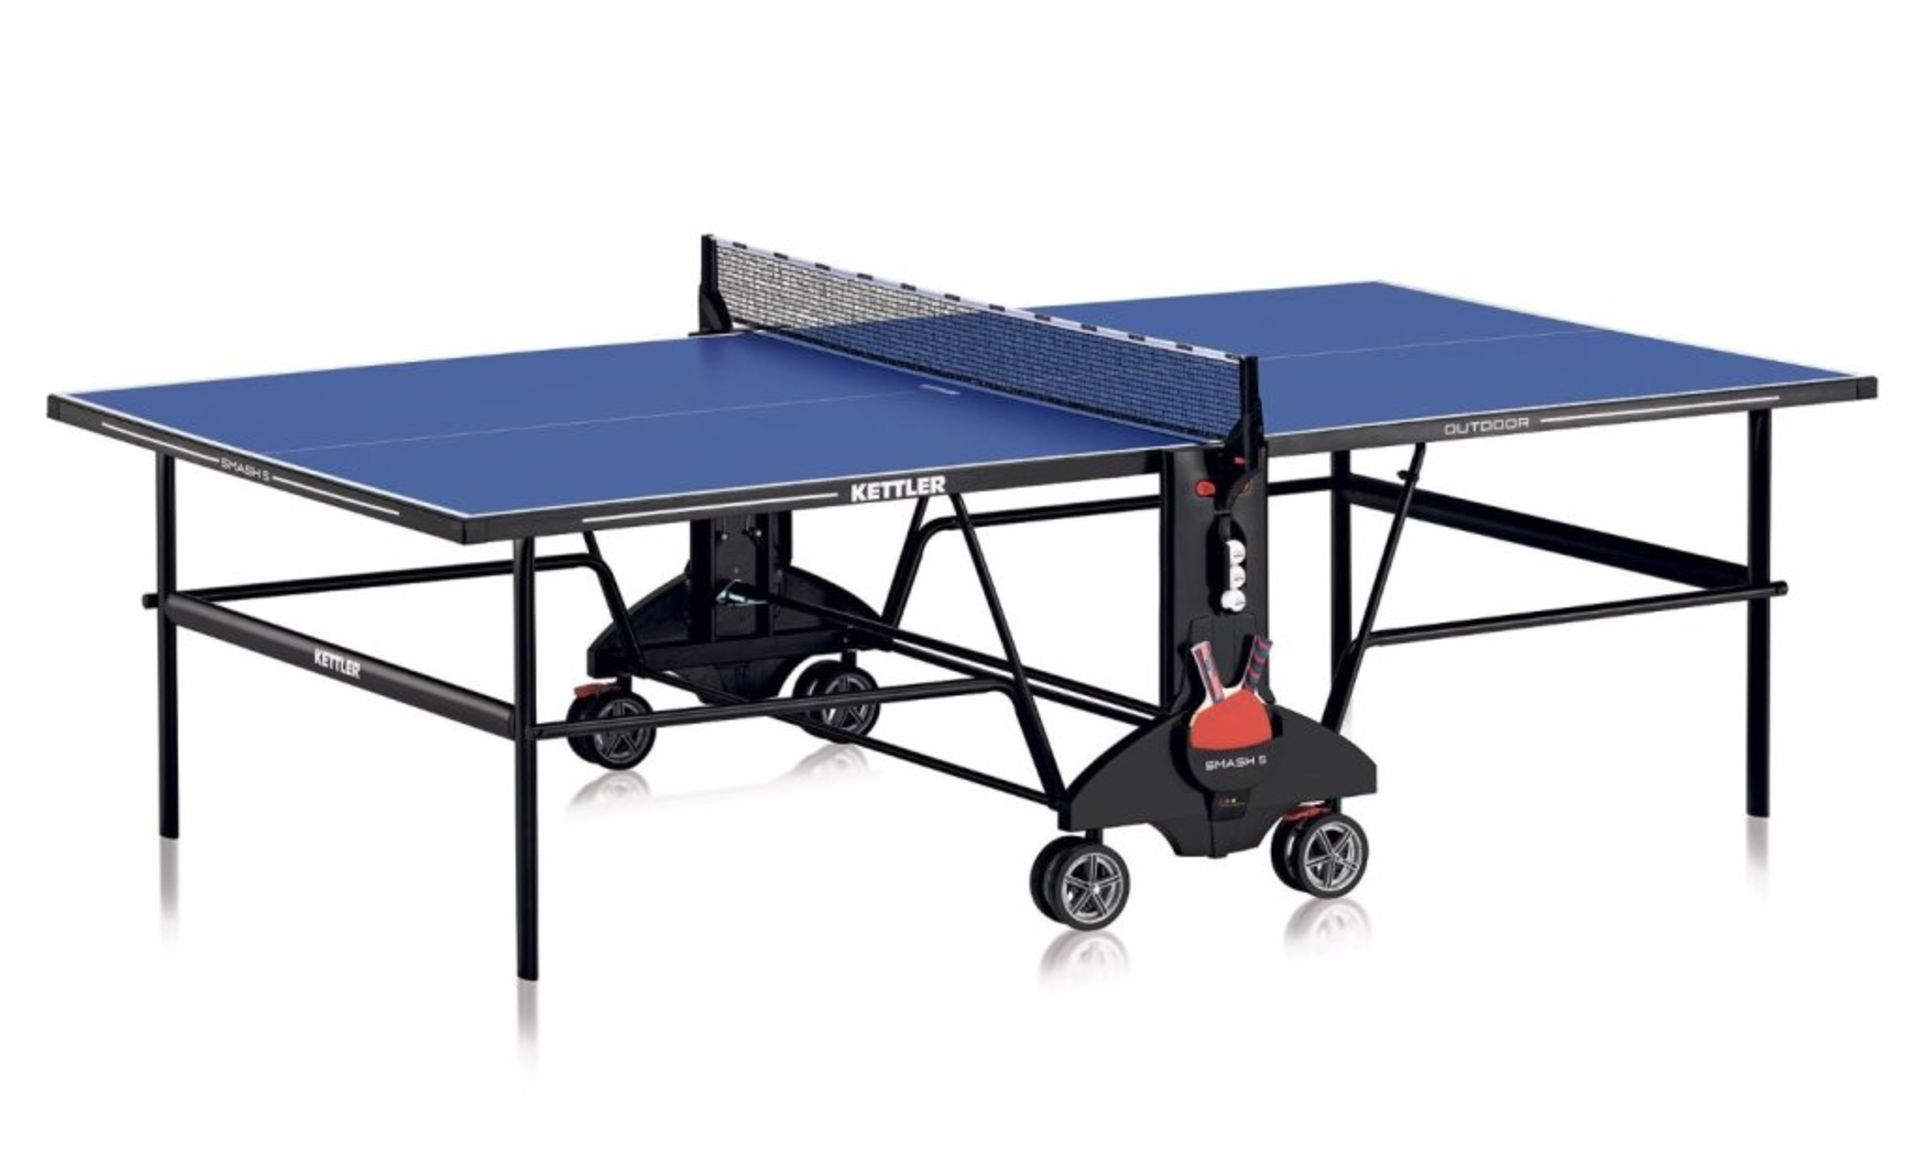 1 x KETTLER STOCK HOME GT OUTDOOR TABLE TENNIS TABLE RRP £430 (7162490)  *PLEASE NOTE THAT THE BID